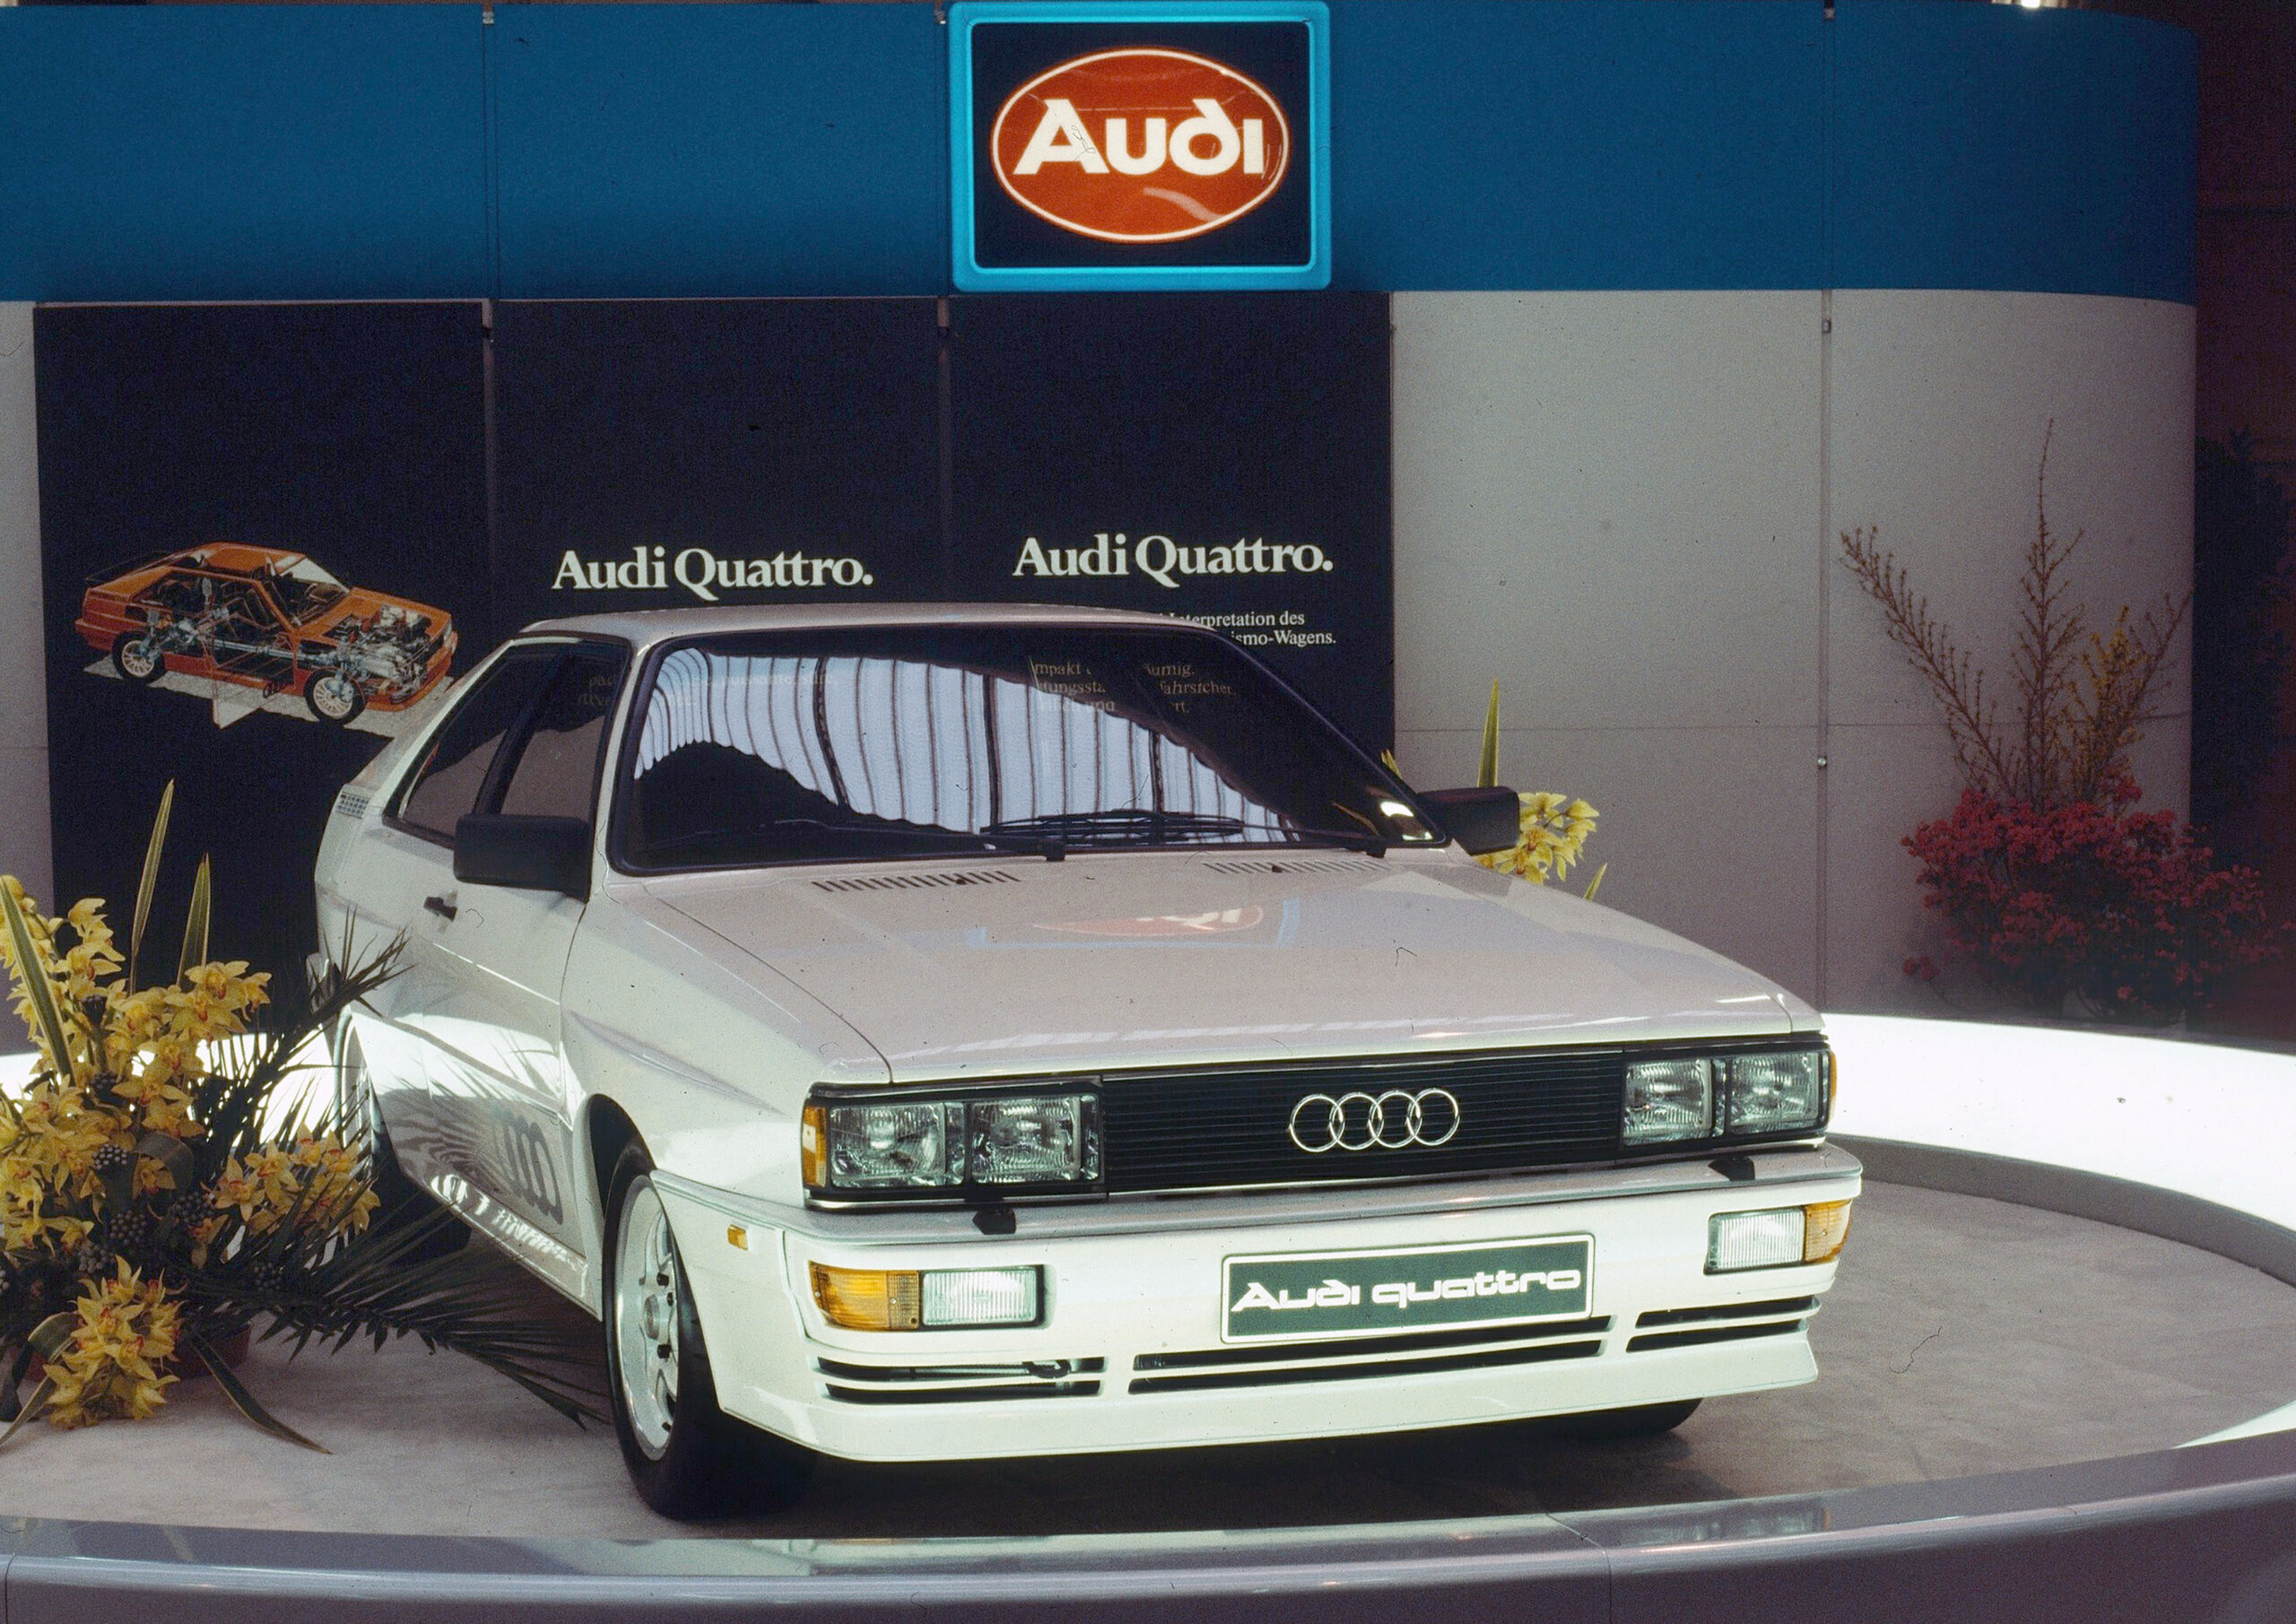 The 75th Geneva Motor Show was where Audi presented the original quattro for the first time on March 3, 1980. Internally, it had the designation model 85.